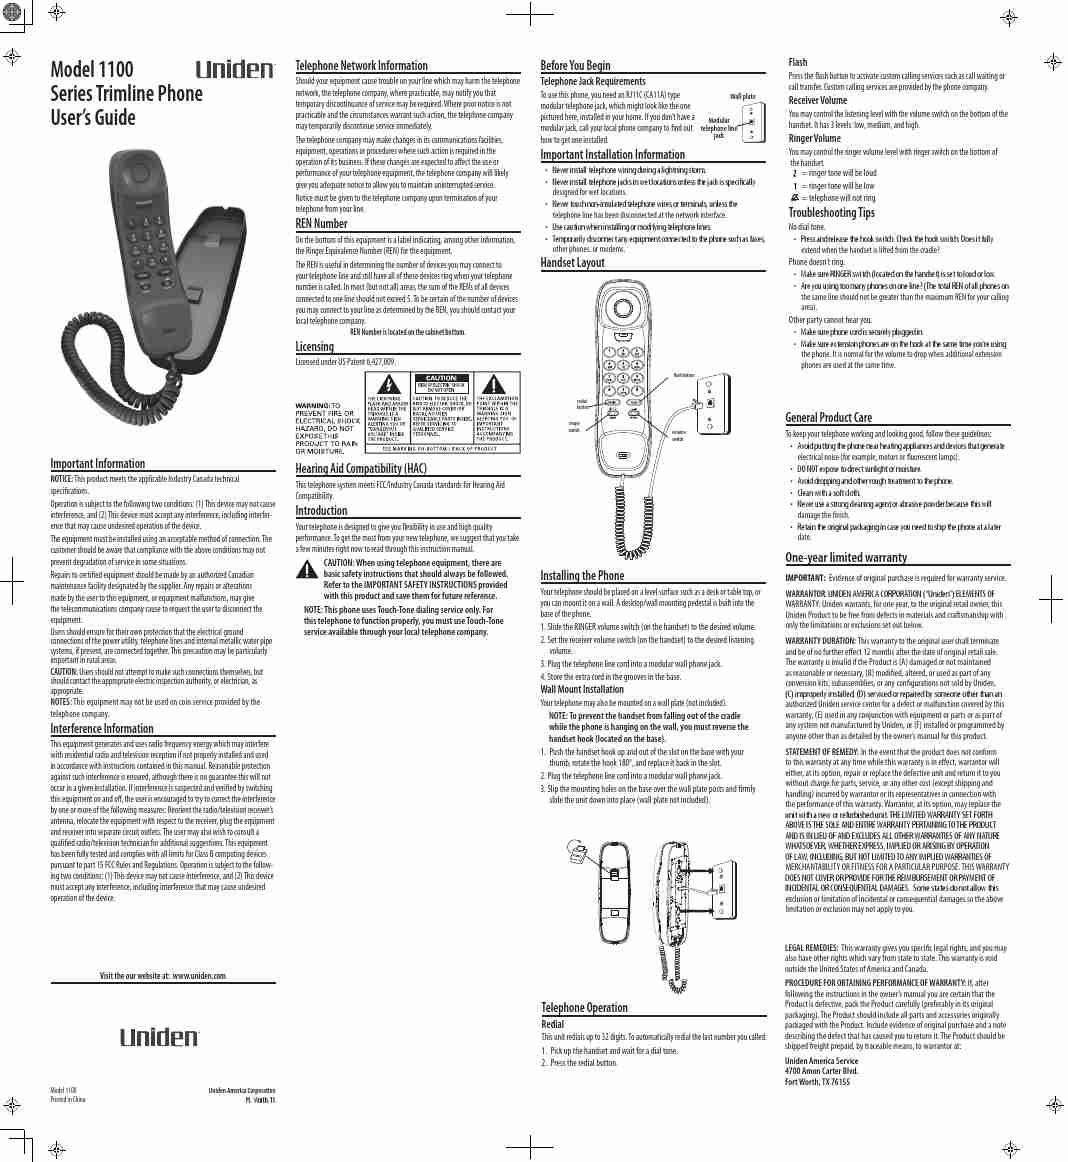 Uniden Telephone 1100 Series-page_pdf